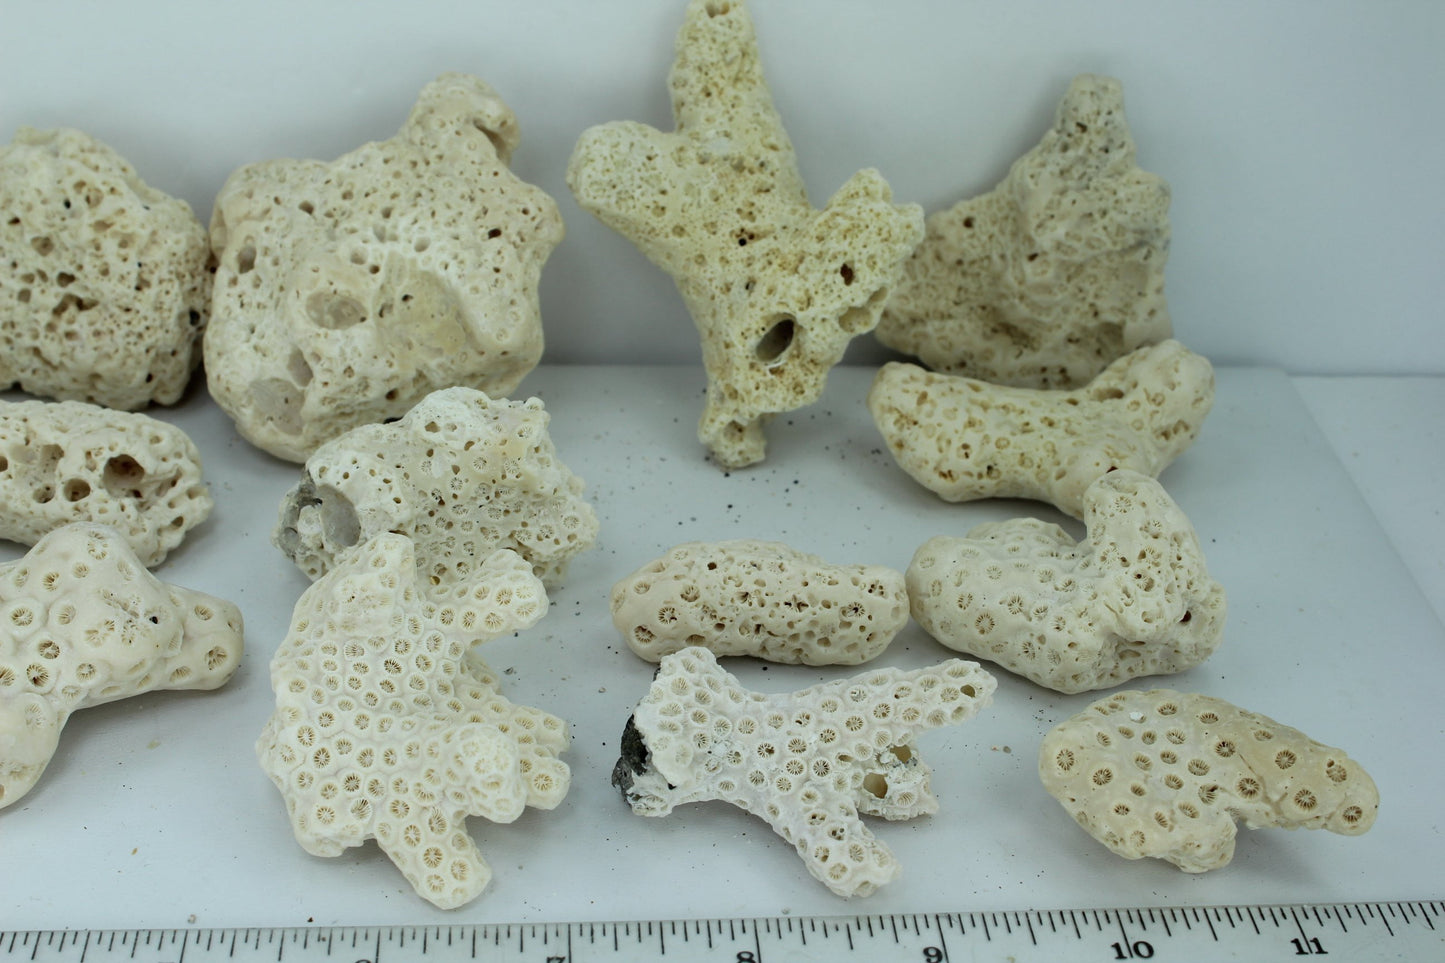 Natural Coral Fossils 16 Small Pieces 3 1/2" to 32 Vintage Estate Collection Aquarium Shell Art Collectibles all shapes